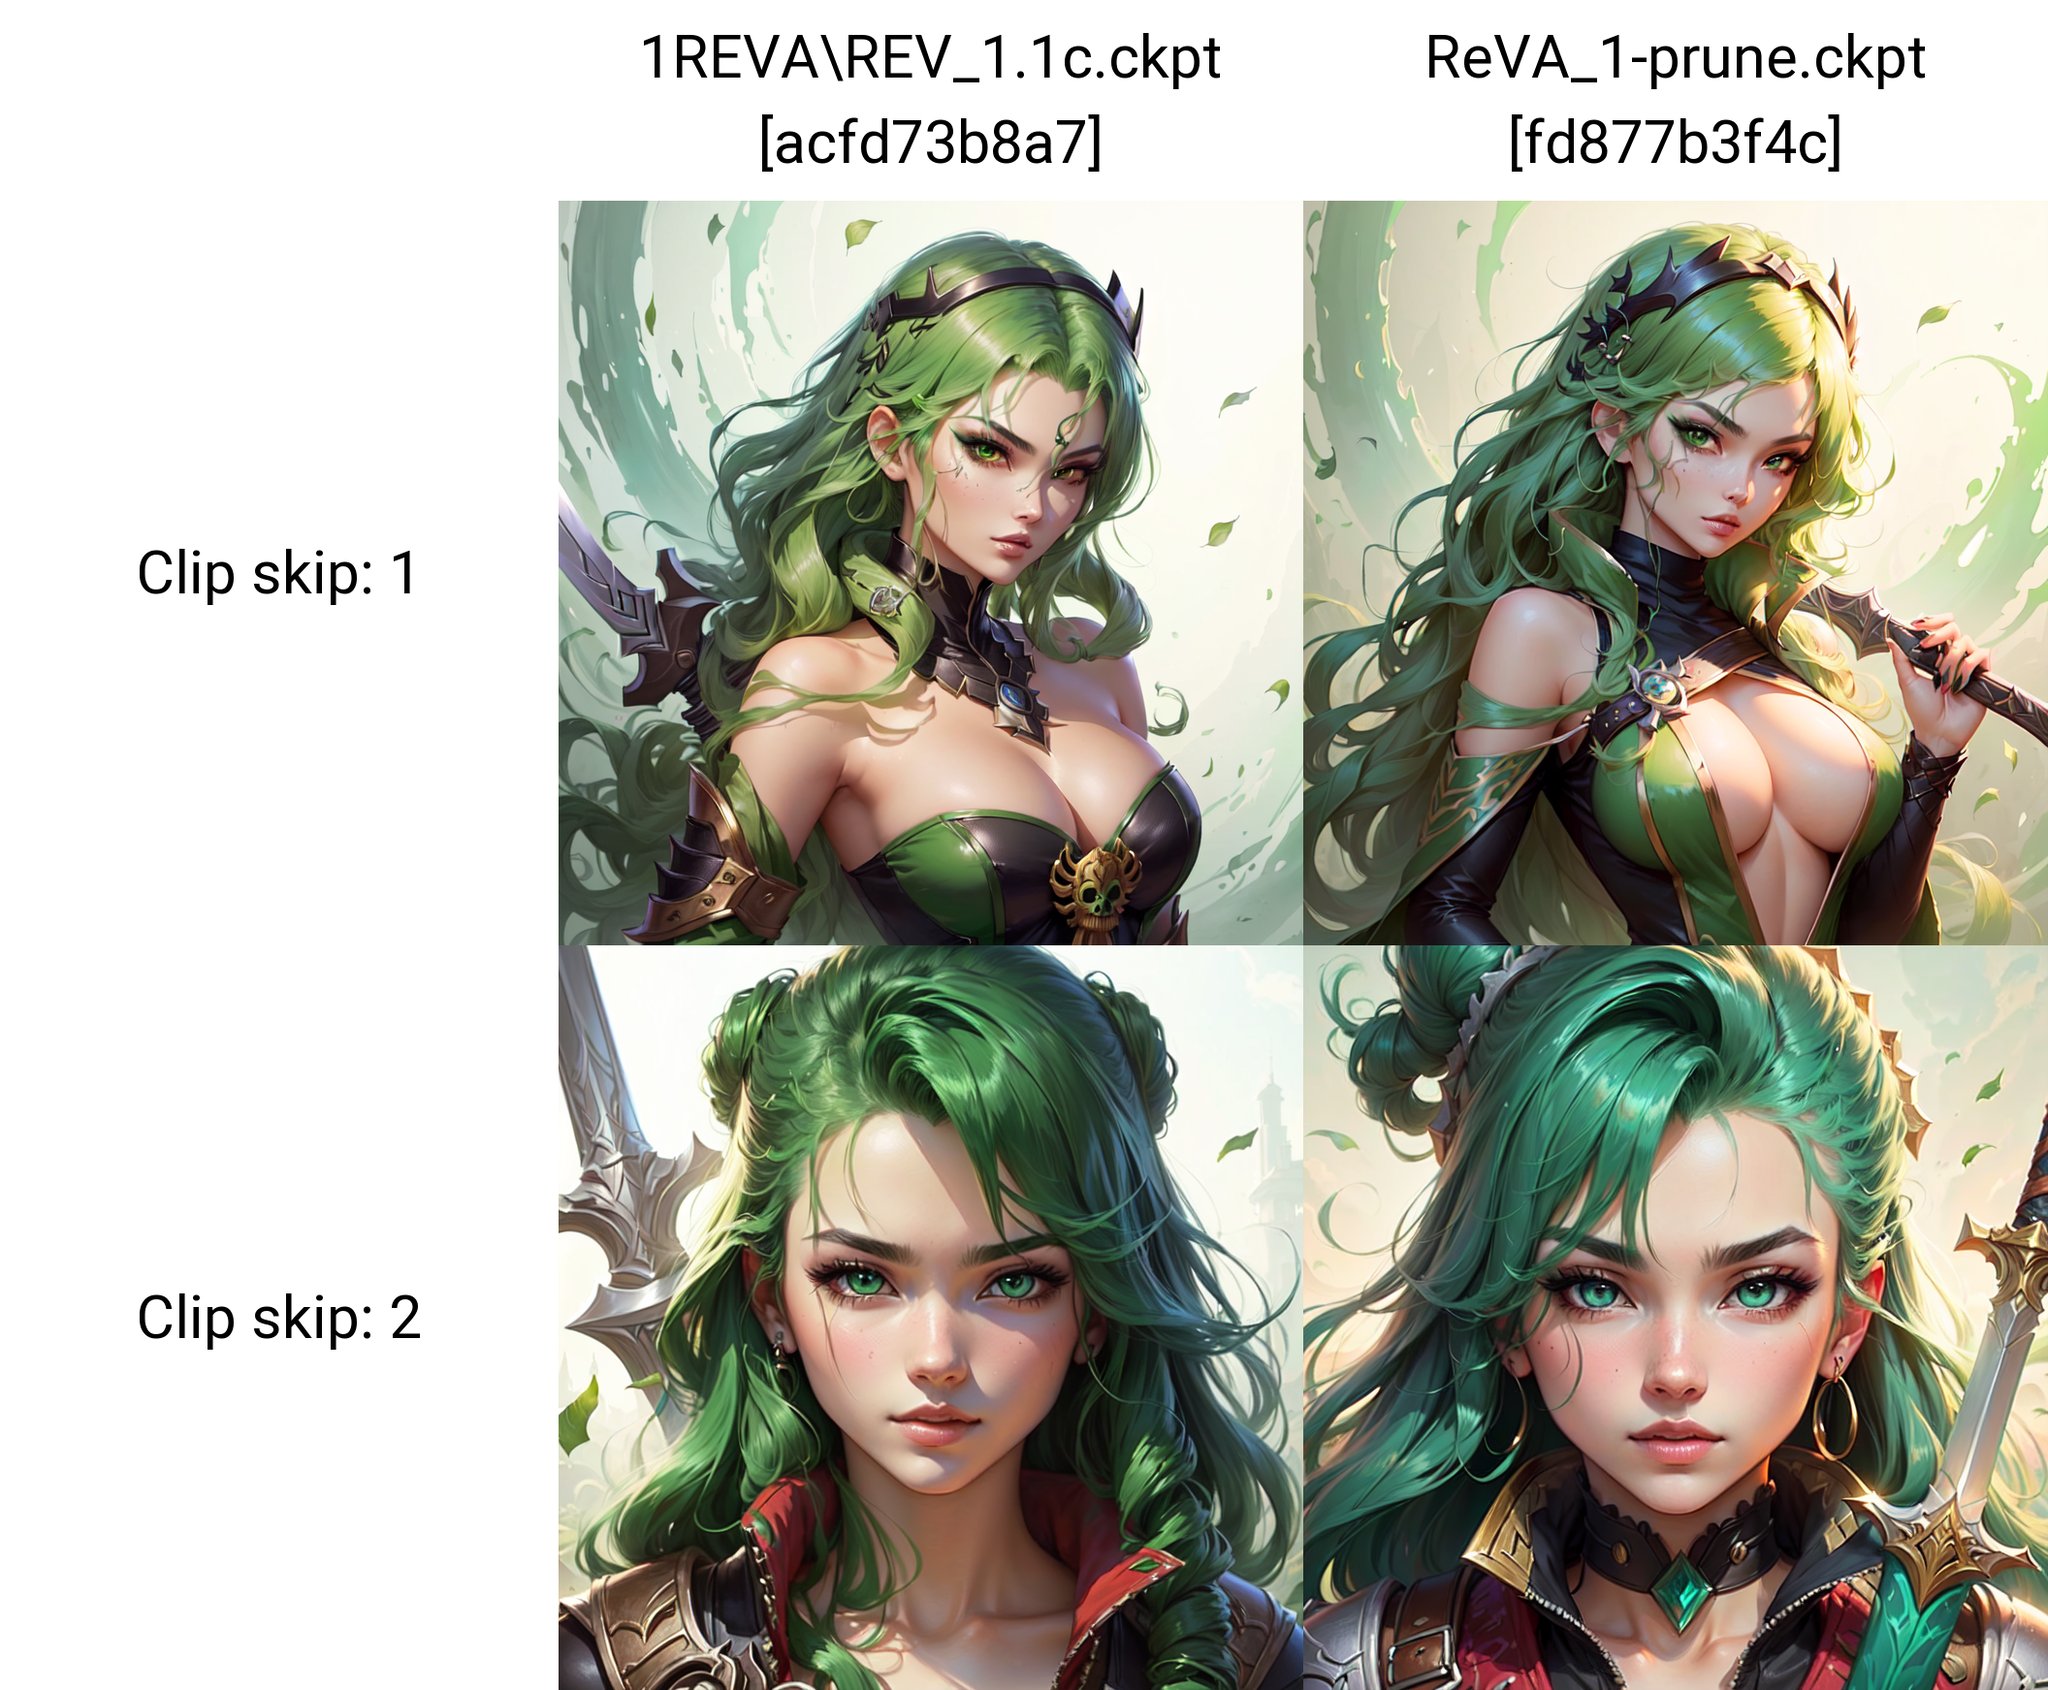 a woman with green hair holding a sword, inspired by Artgerm, pixiv contest winner, portrait of an octopus goddess, berserk art style, senna from league of legends, close-up portrait goddess skull, tatsumaki with green curly hair, loadscreen”, painted with a thick brush, card game illustration, hd anime wallaper, lowres, akali from league of legends